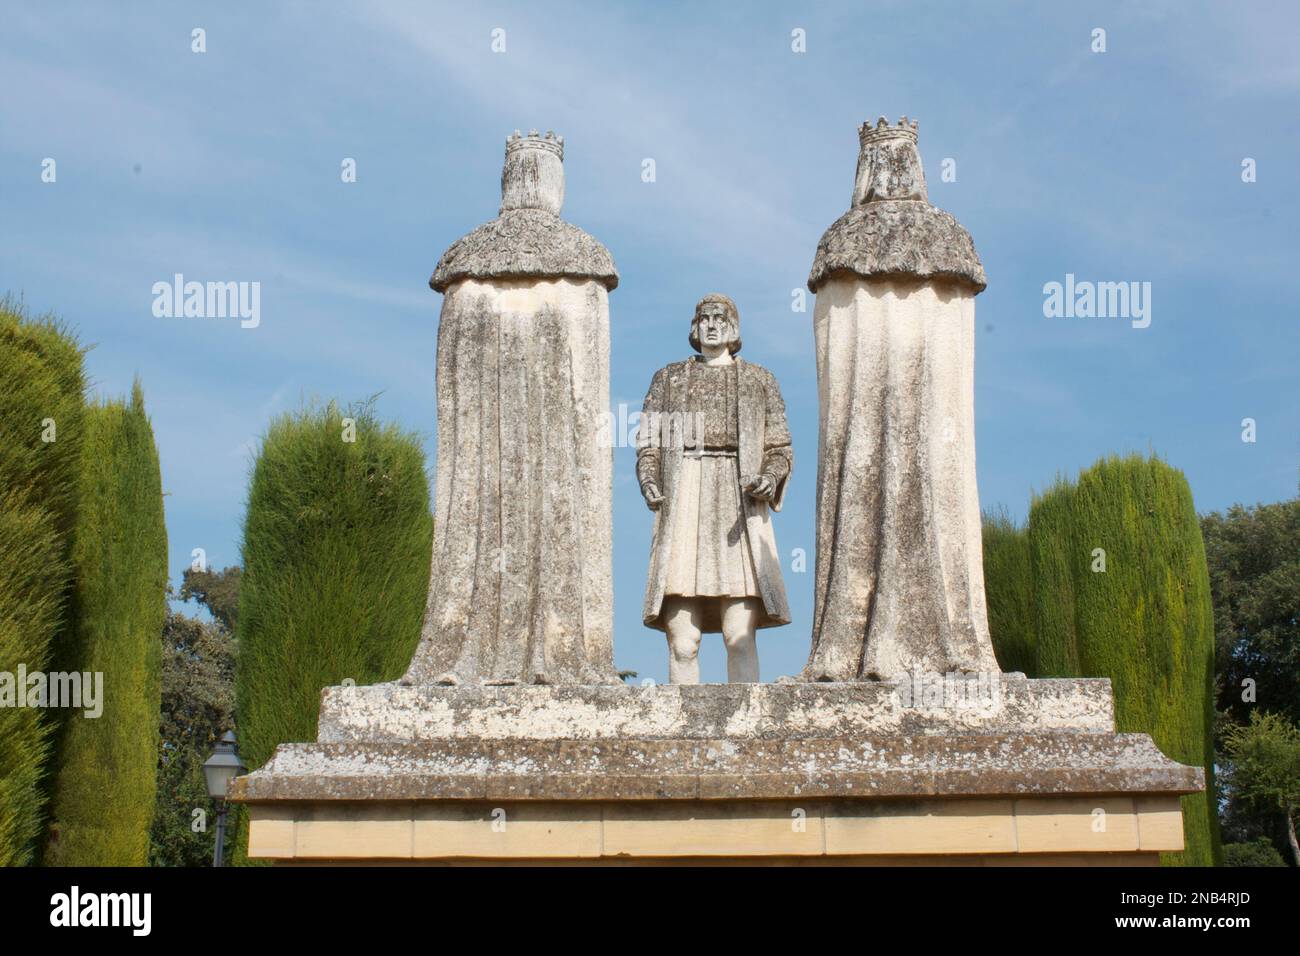 Statue of the Catholic Monarchs and Christopher Columbus, Gardens of Alcazar, Cordoba, Andalusia, Spain Stock Photo